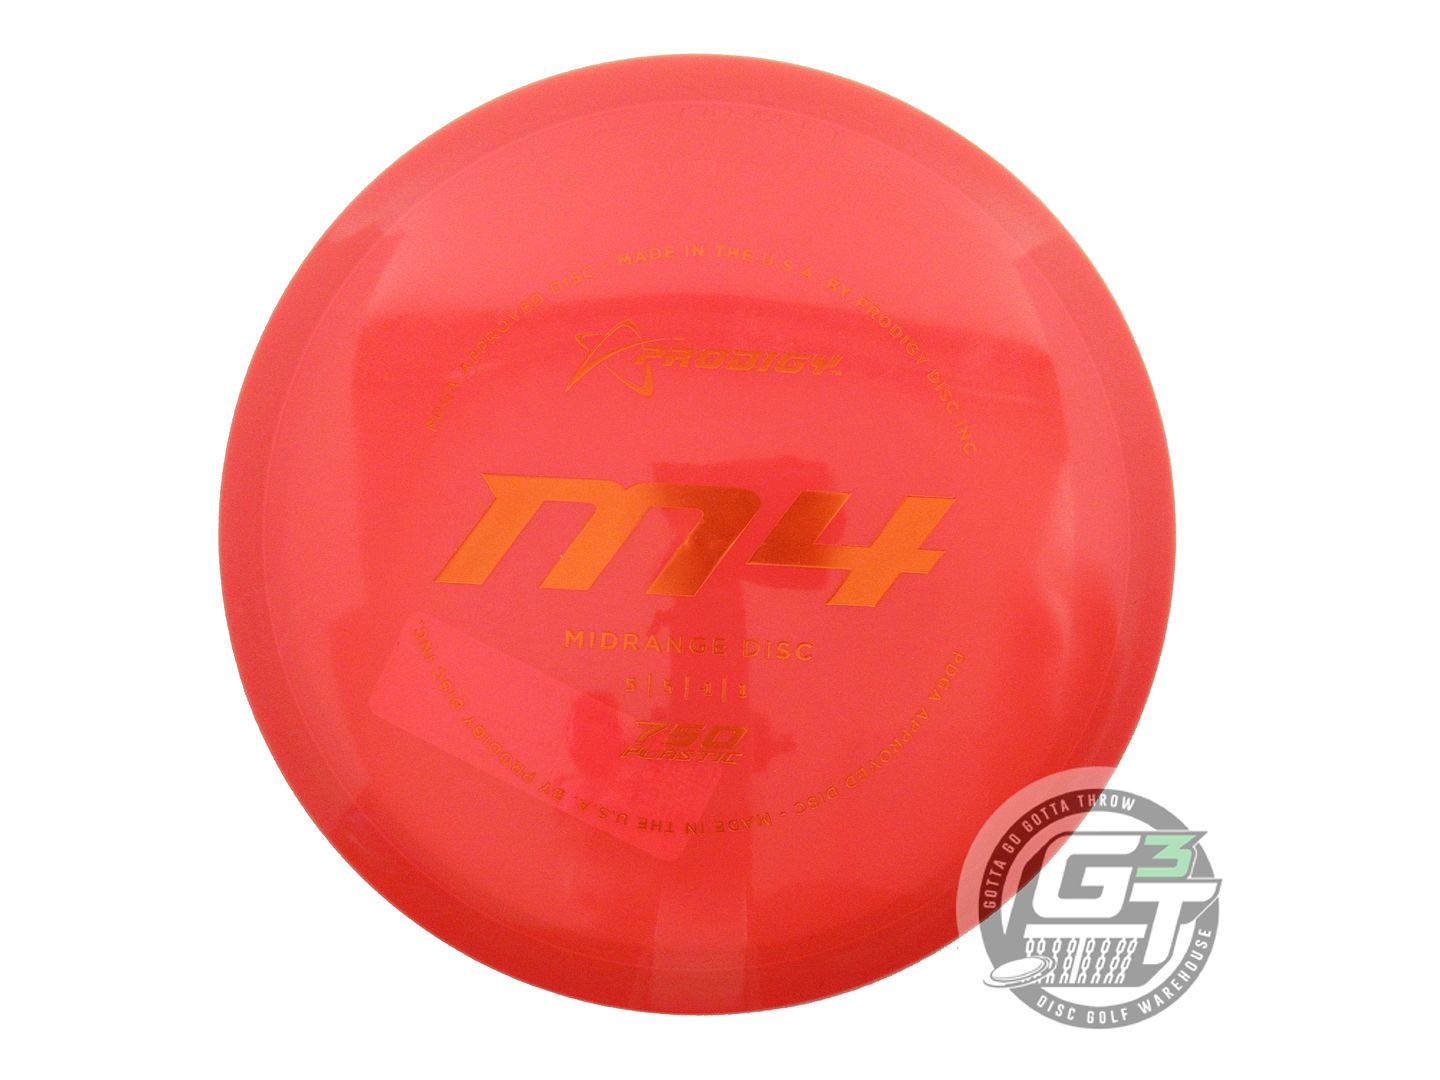 Prodigy 750 Series M4 Midrange Golf Disc (Individually Listed)